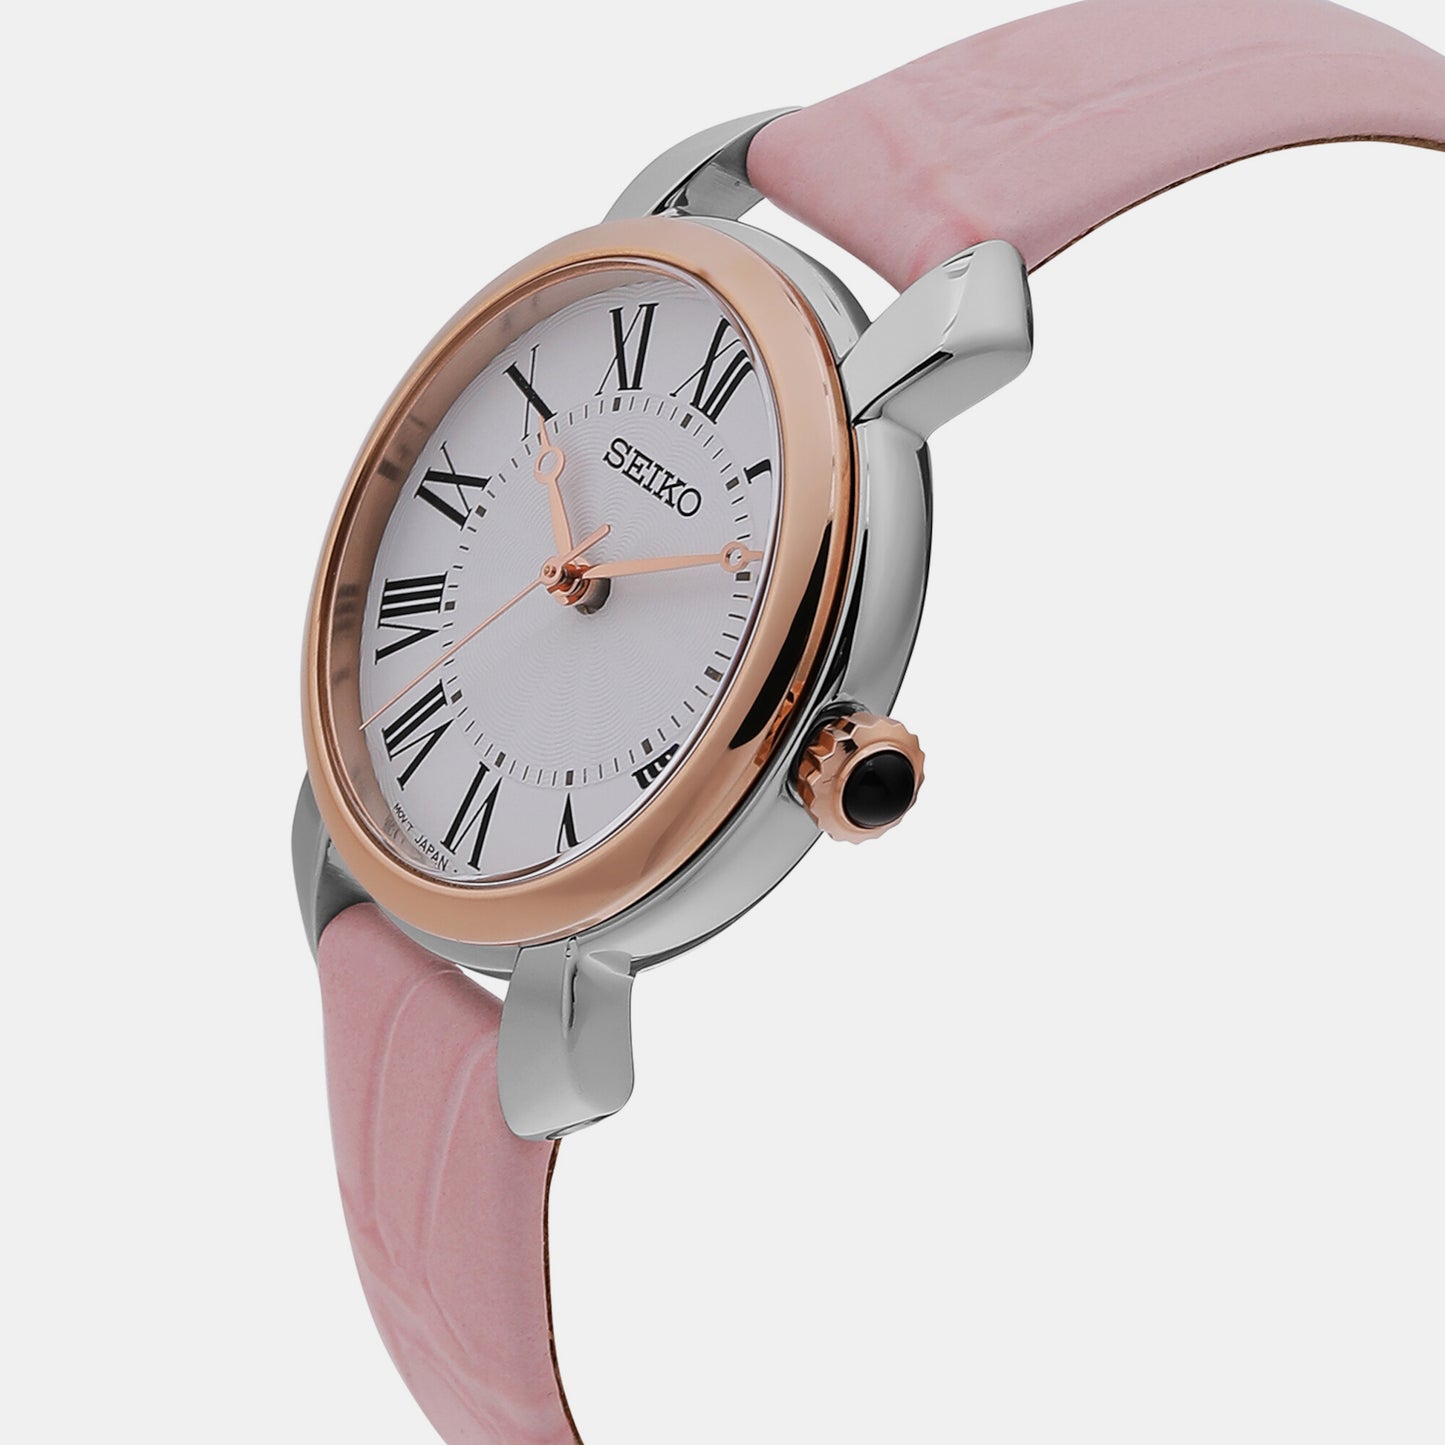 Female White Analog Leather Watch SUR628P2